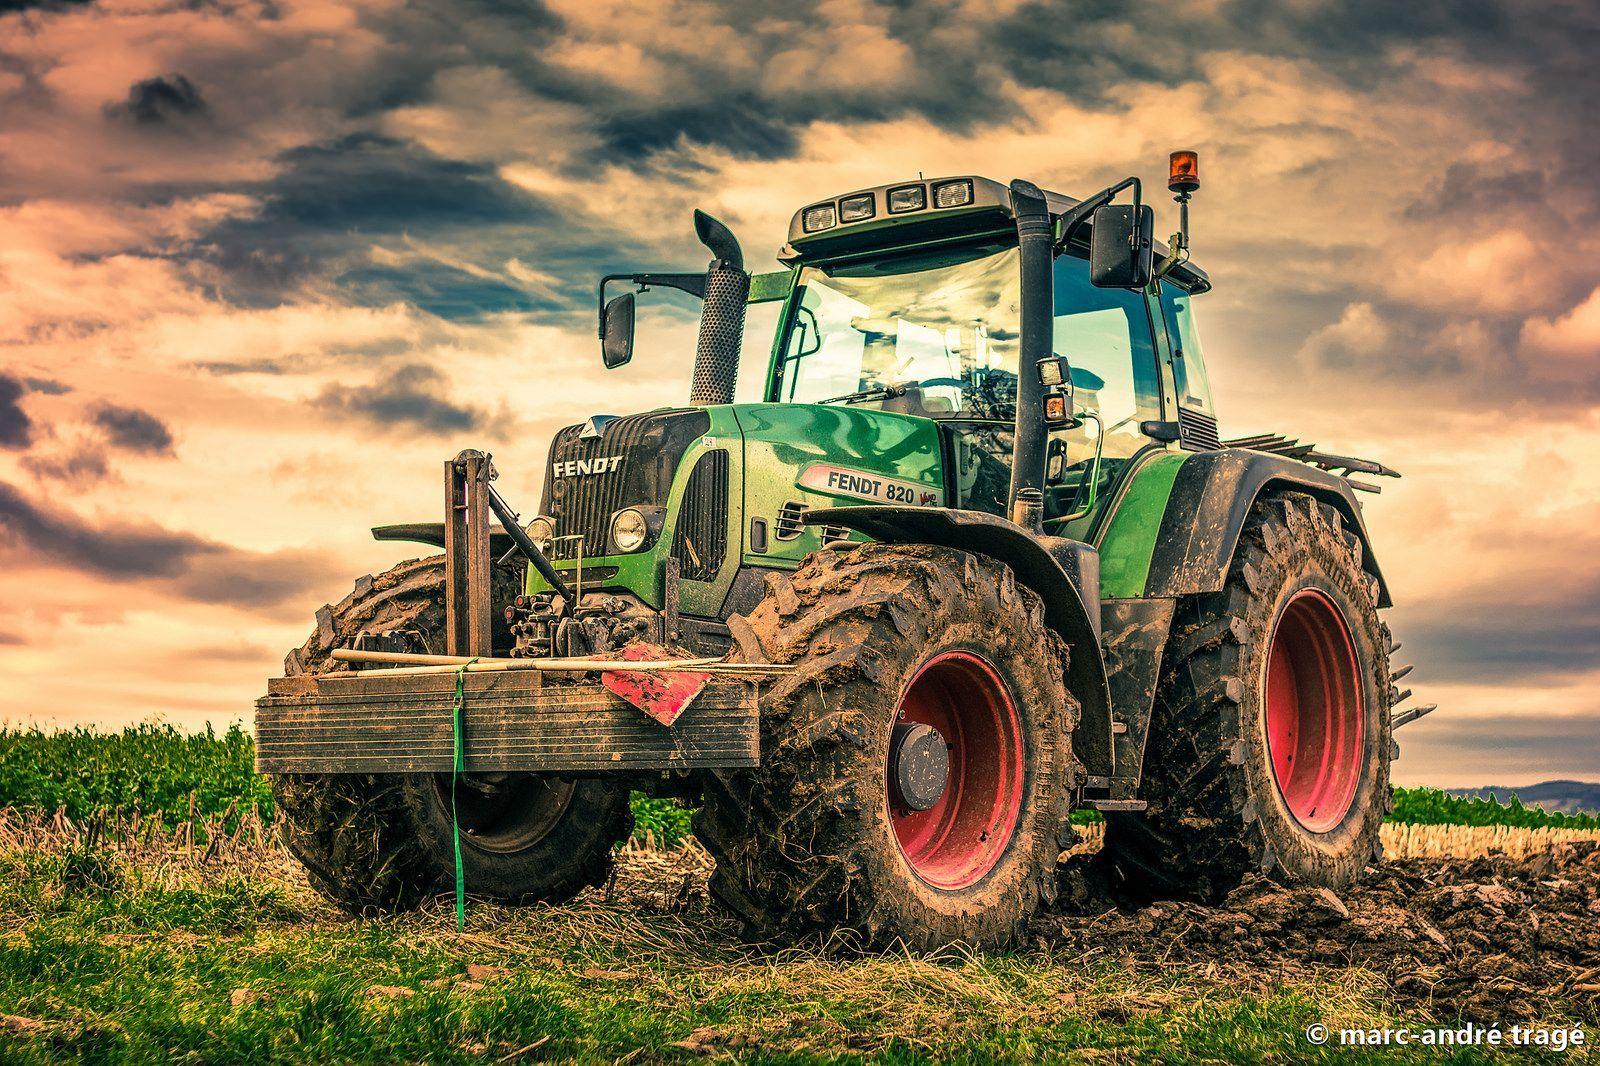 Larger-Tractor, Combine Sales Strong in November; AGCO Wins Awards